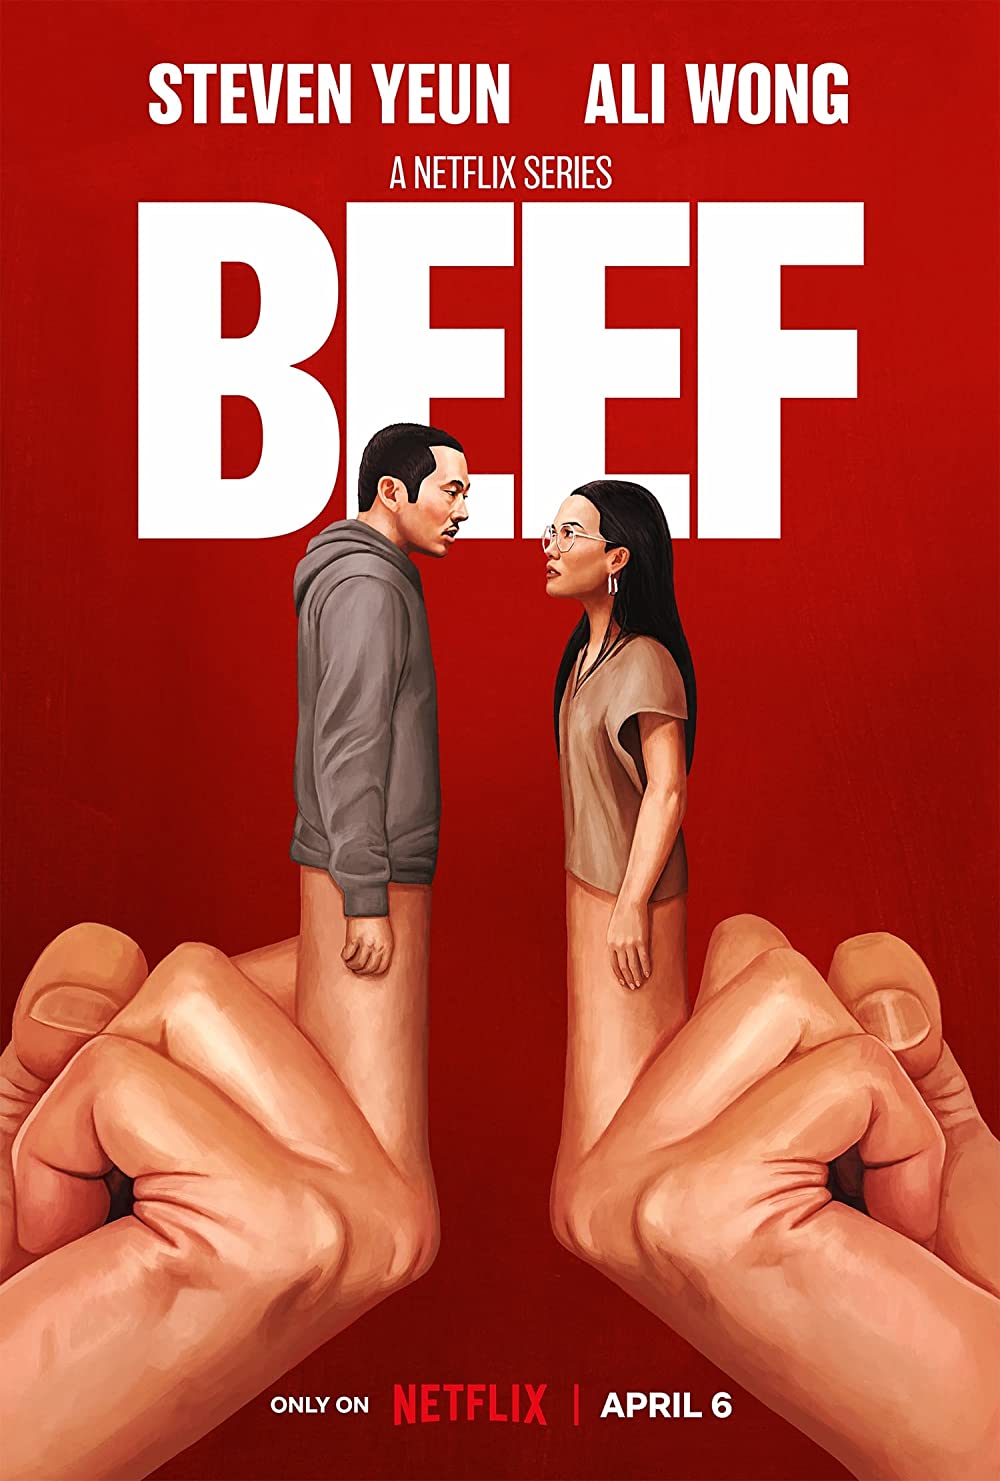 Steven Yeun and comedian Ali Wong star in the tense and emotional drama Beef, which came out this April on Netflix. Yeun has been on a run of critically acclaimed projects beginning with the heart-warming Minari in 2020, and then followed up by Jordan Peeles Nope last summer.